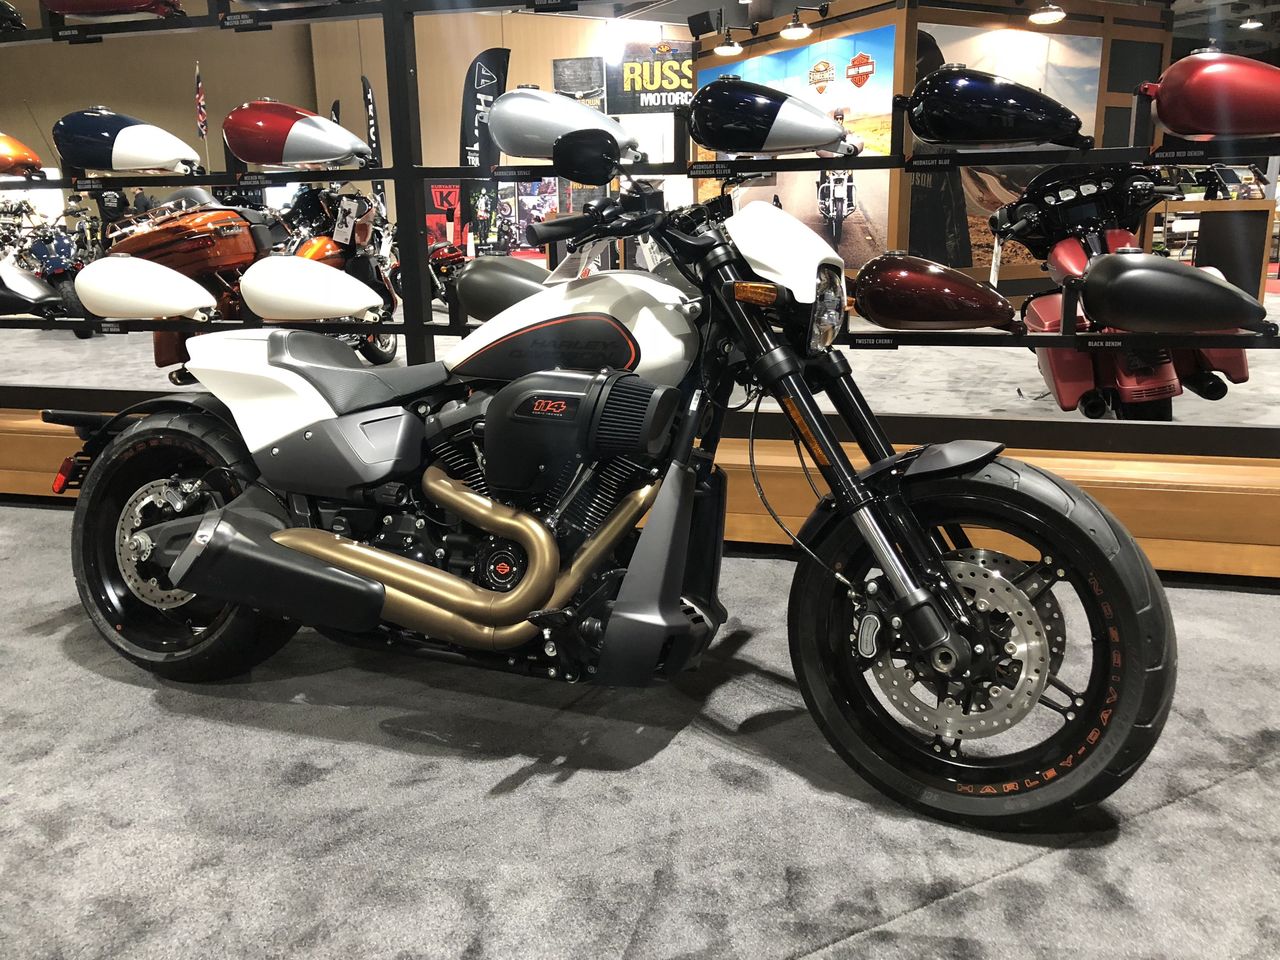 The 2019 H-D FXDR 114